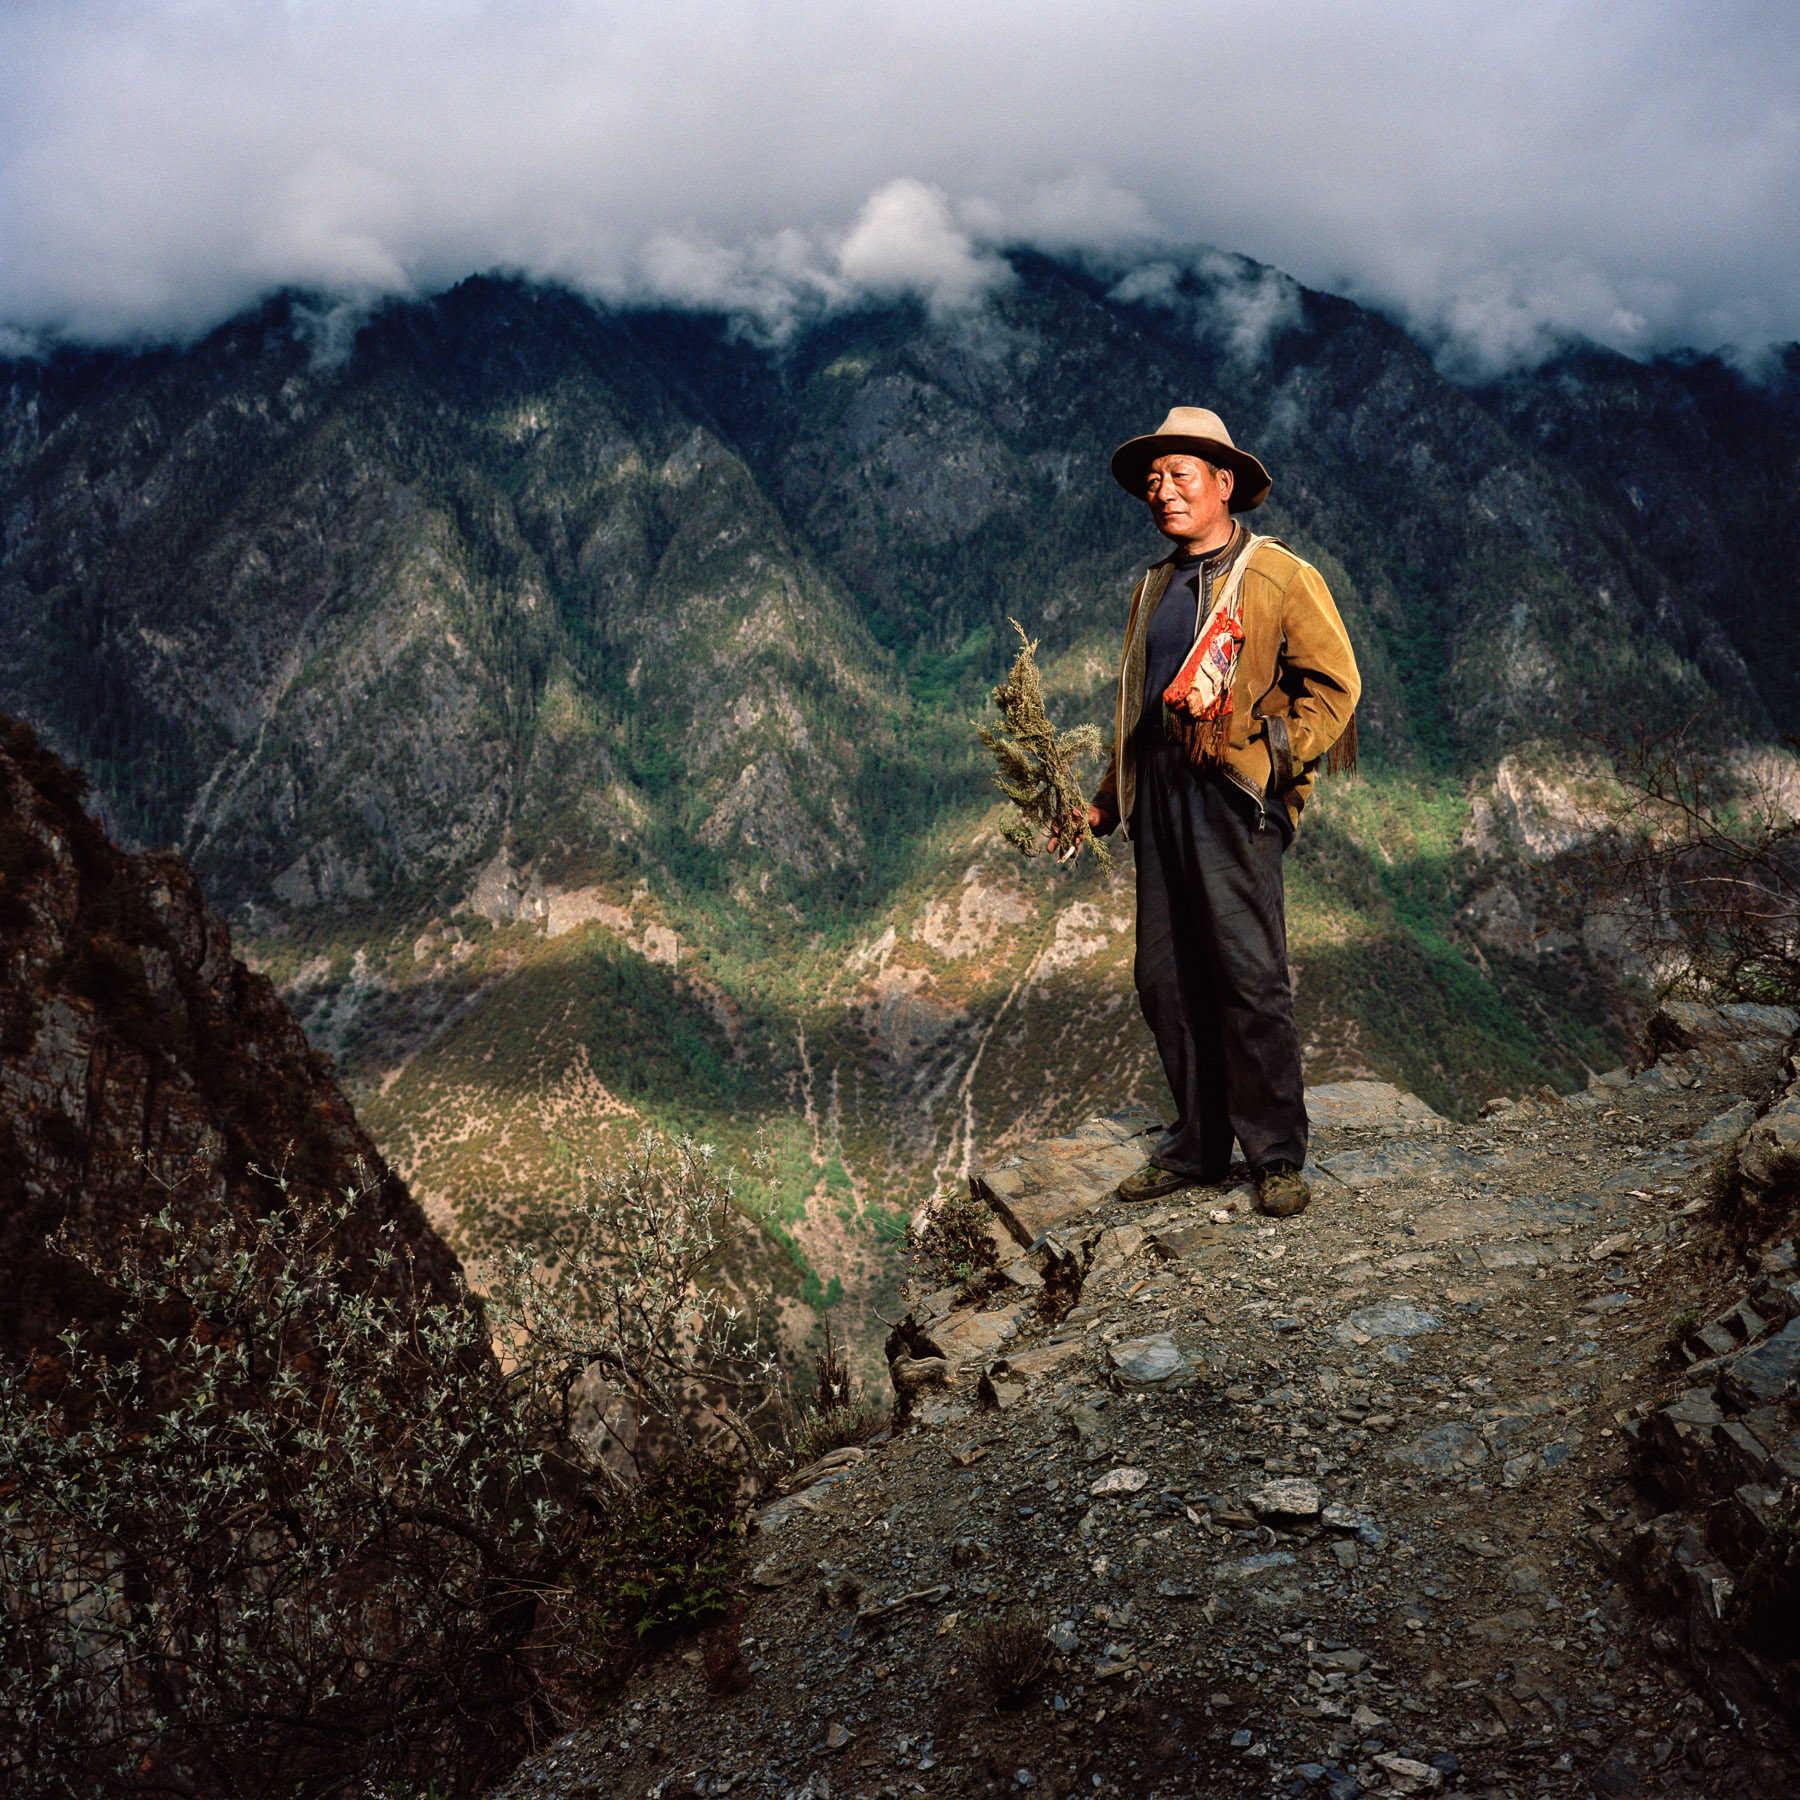  May 2012. Tibet province, China. Portrait of a Tibetan farmer from the village of Laide at 3100m high on the trail of the buddhist pilgrimage of the Kawa Karpo. After several days camping on the mountains on the trail of the pilgrimage, we made it t